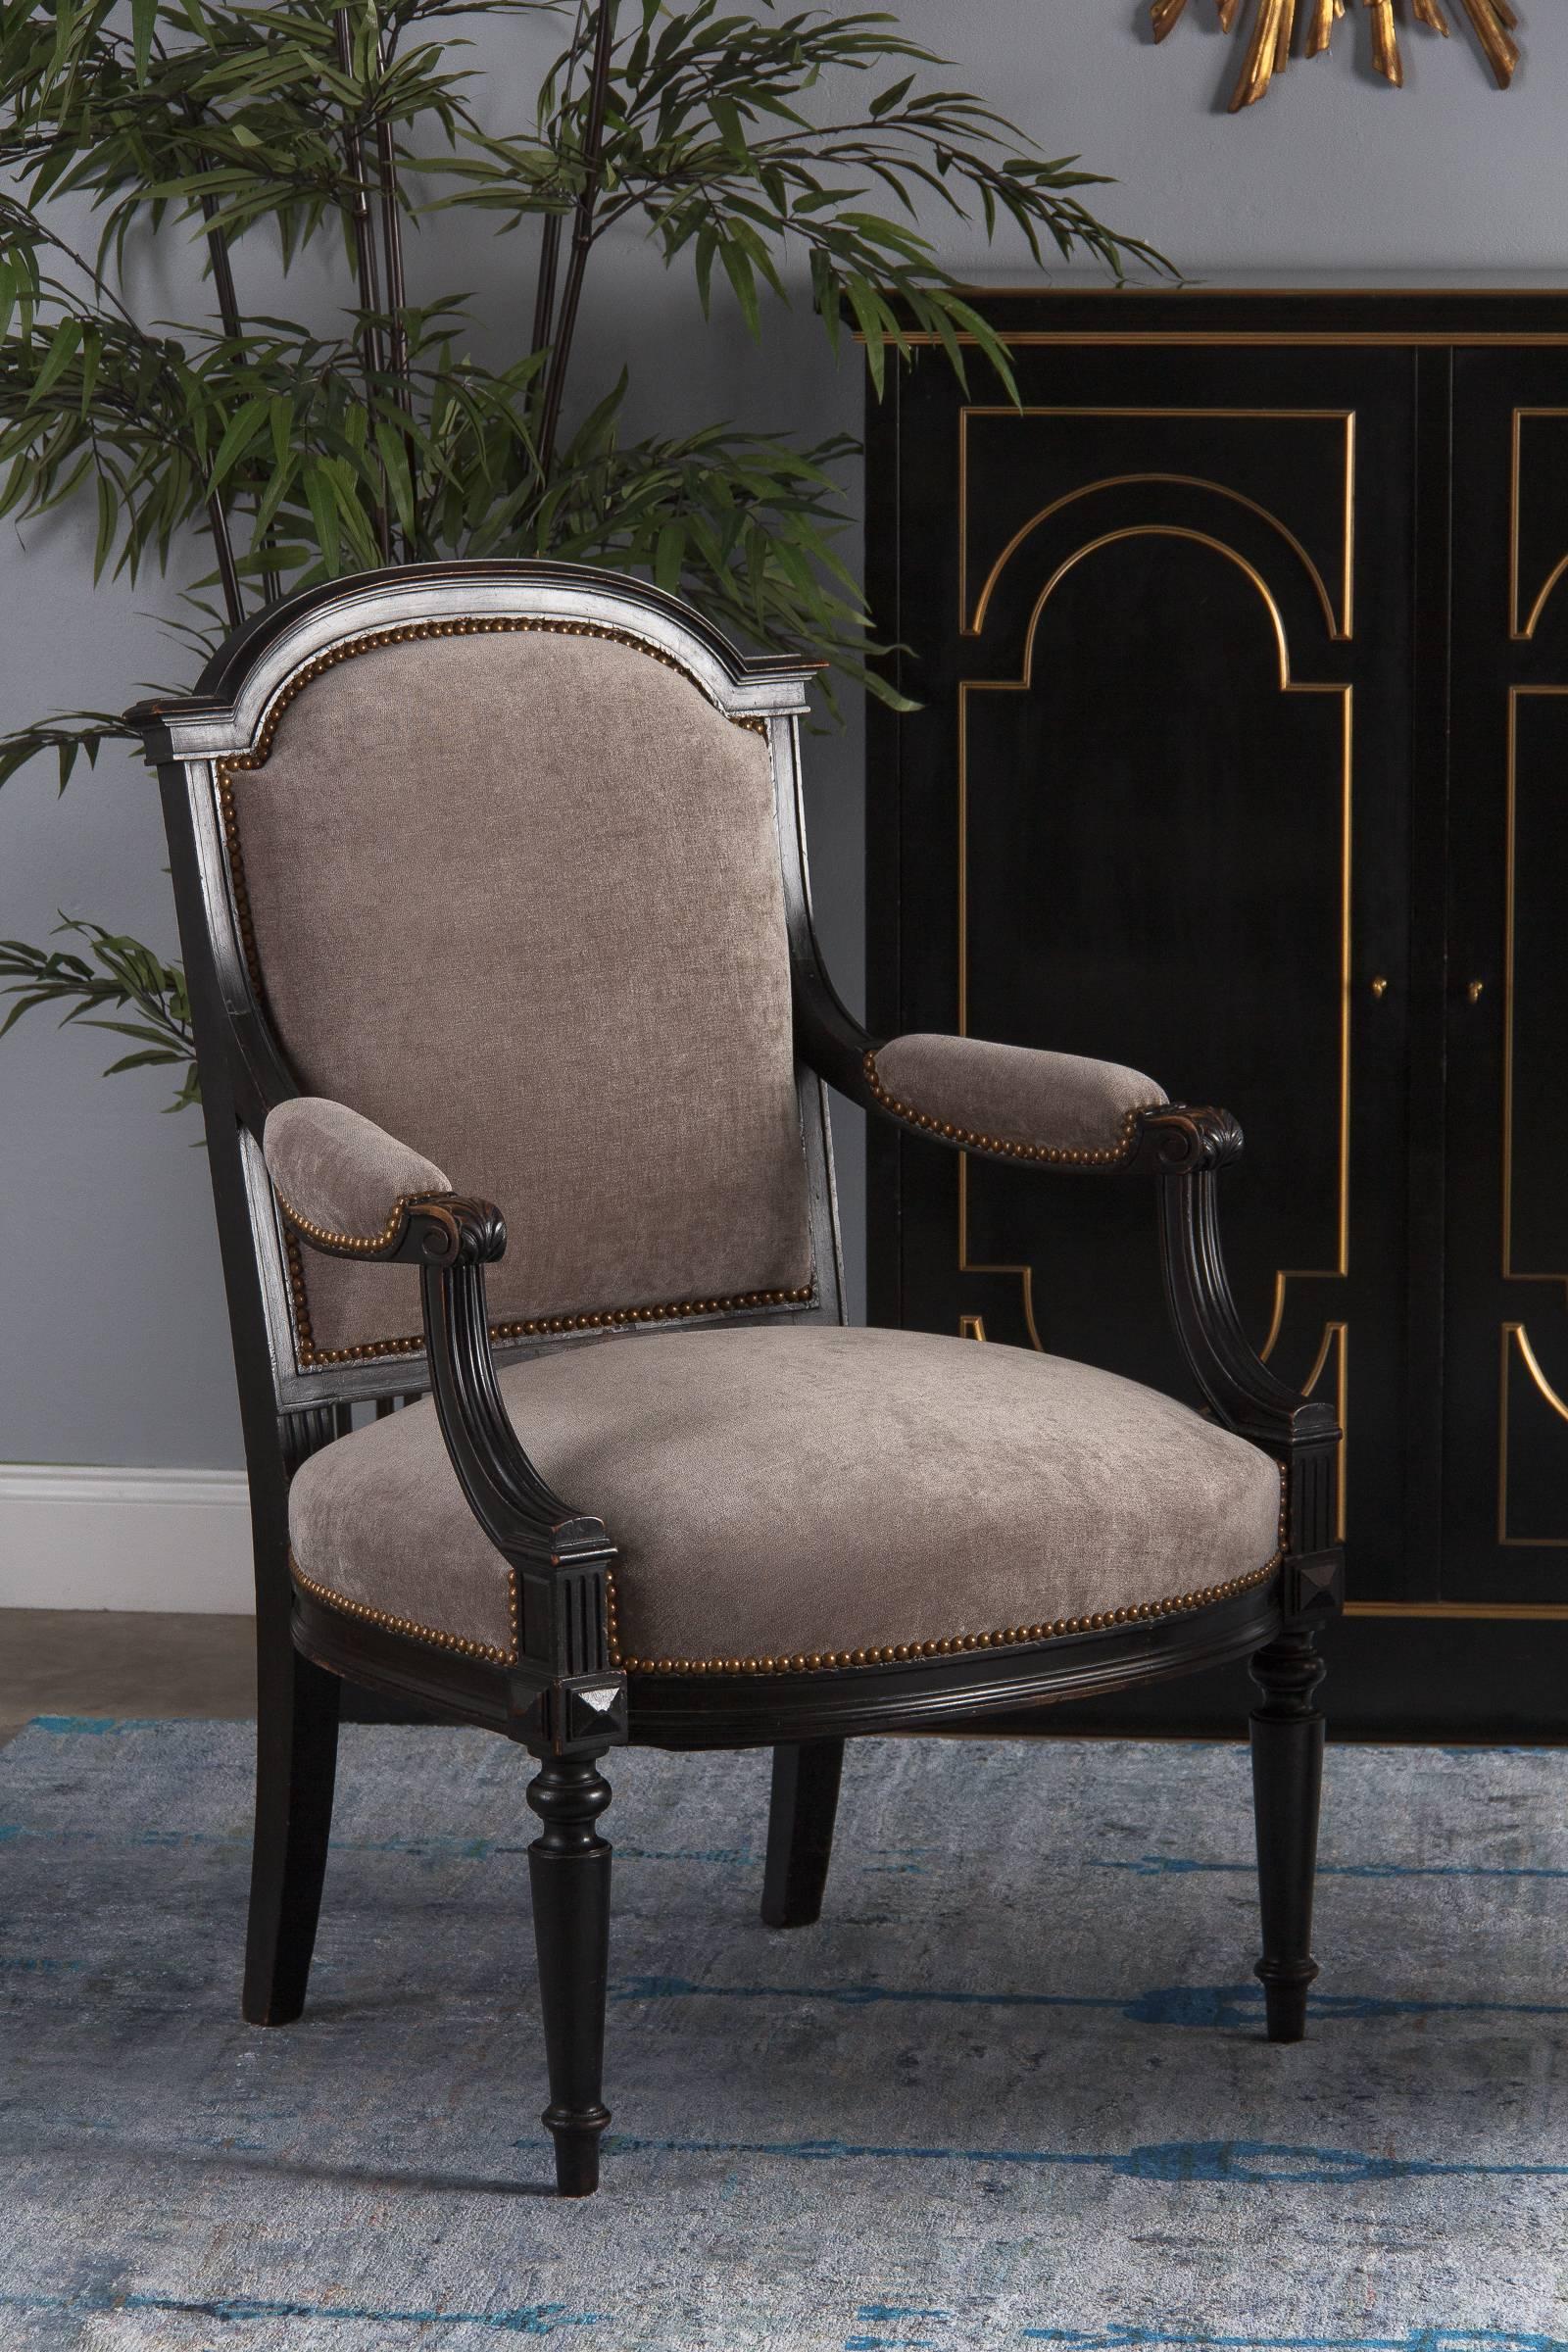 A Napoleon III period armchair in ebonized pear wood. It has been recently re-upholstered in a fine neutral taupe with a velvety feel, finished with antiques nails. The wide, comfortable armchair has an arched top, curved and fluted armrests with